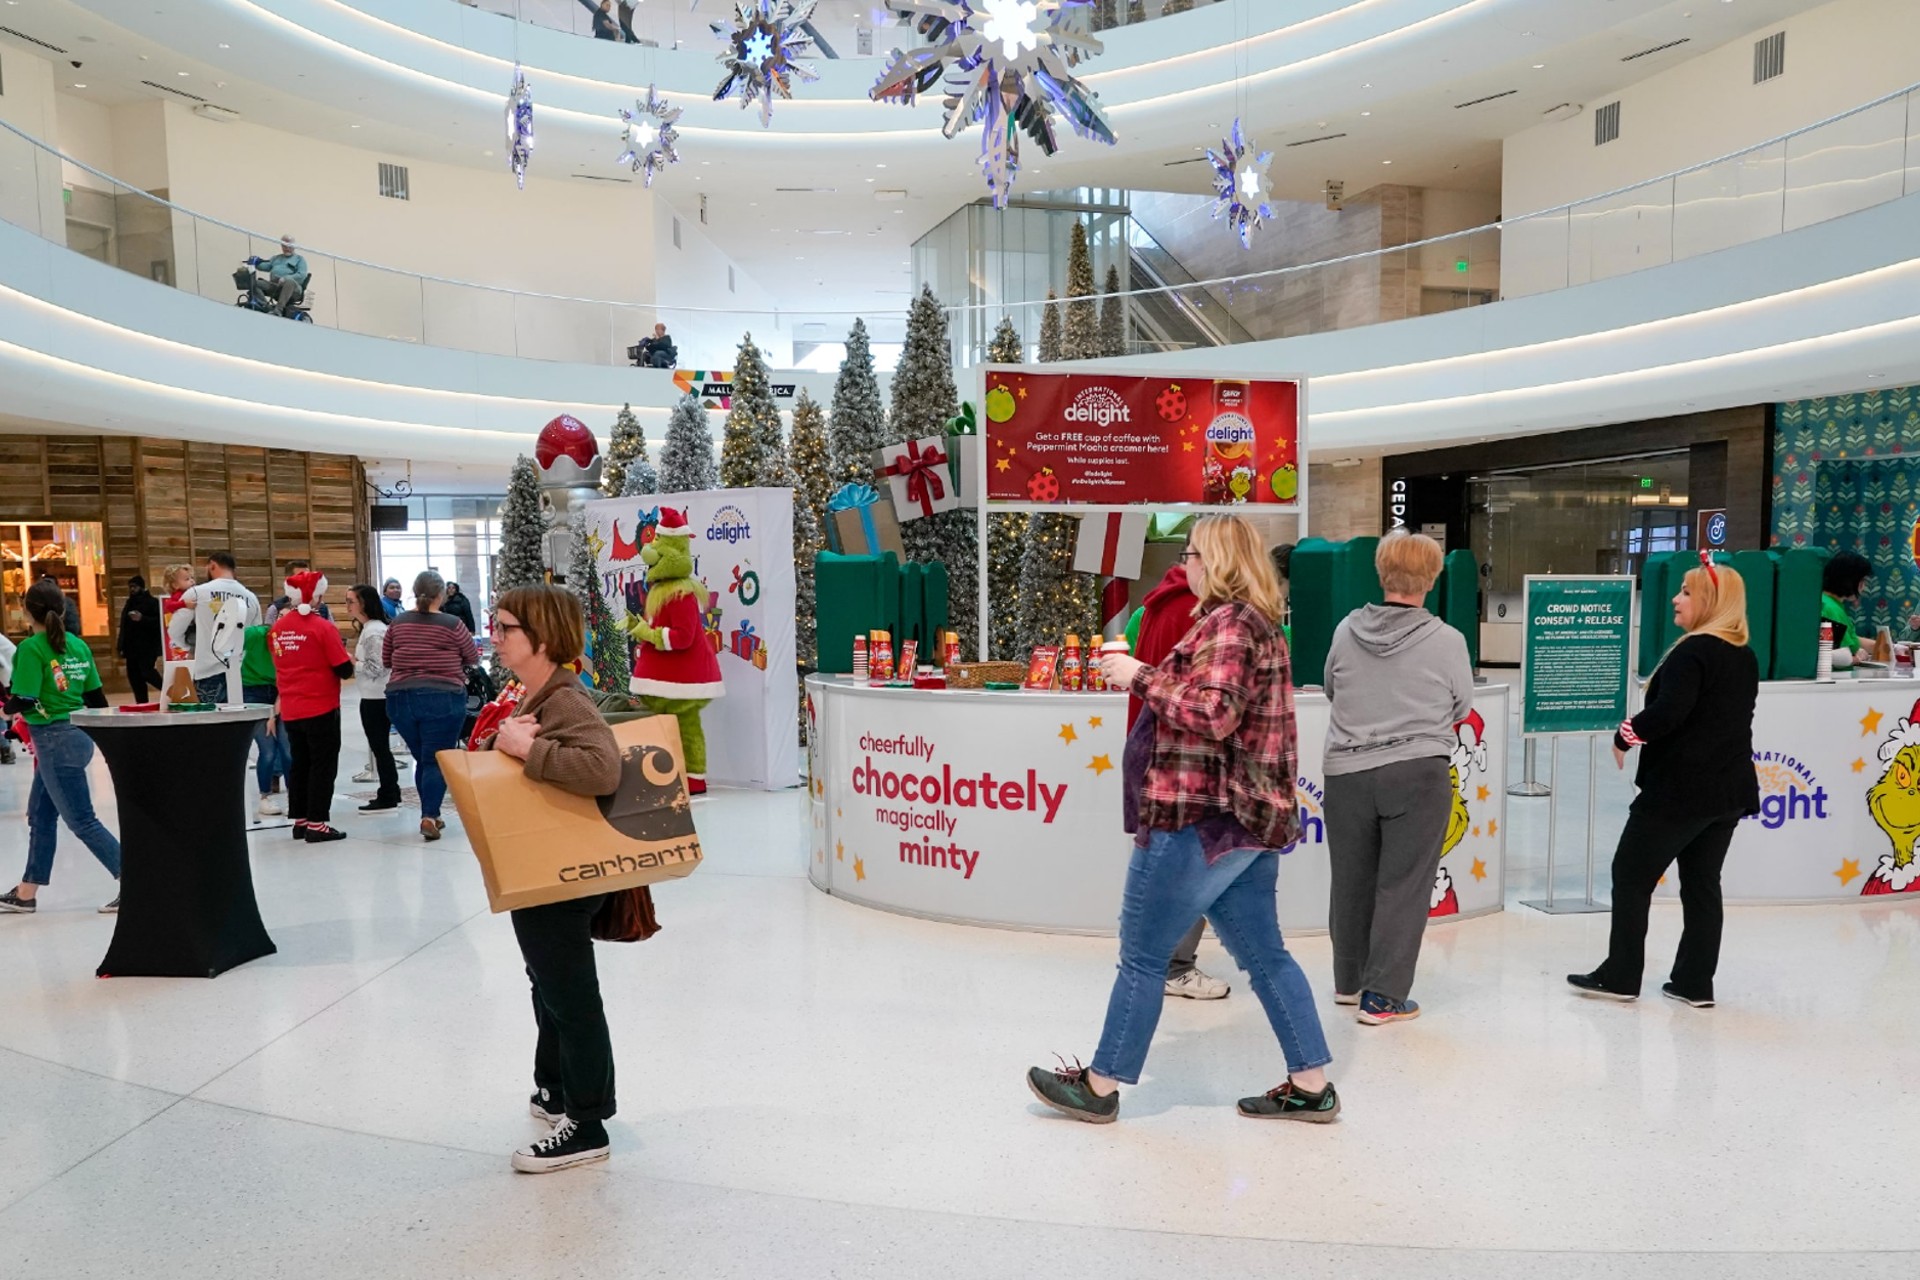 International Delight surprises and delights shoppers with free coffee and Grinch-themed Peppermint Mocha creamer at Mall of America on Thursday, Dec. 8, 2022, in Minneapolis.